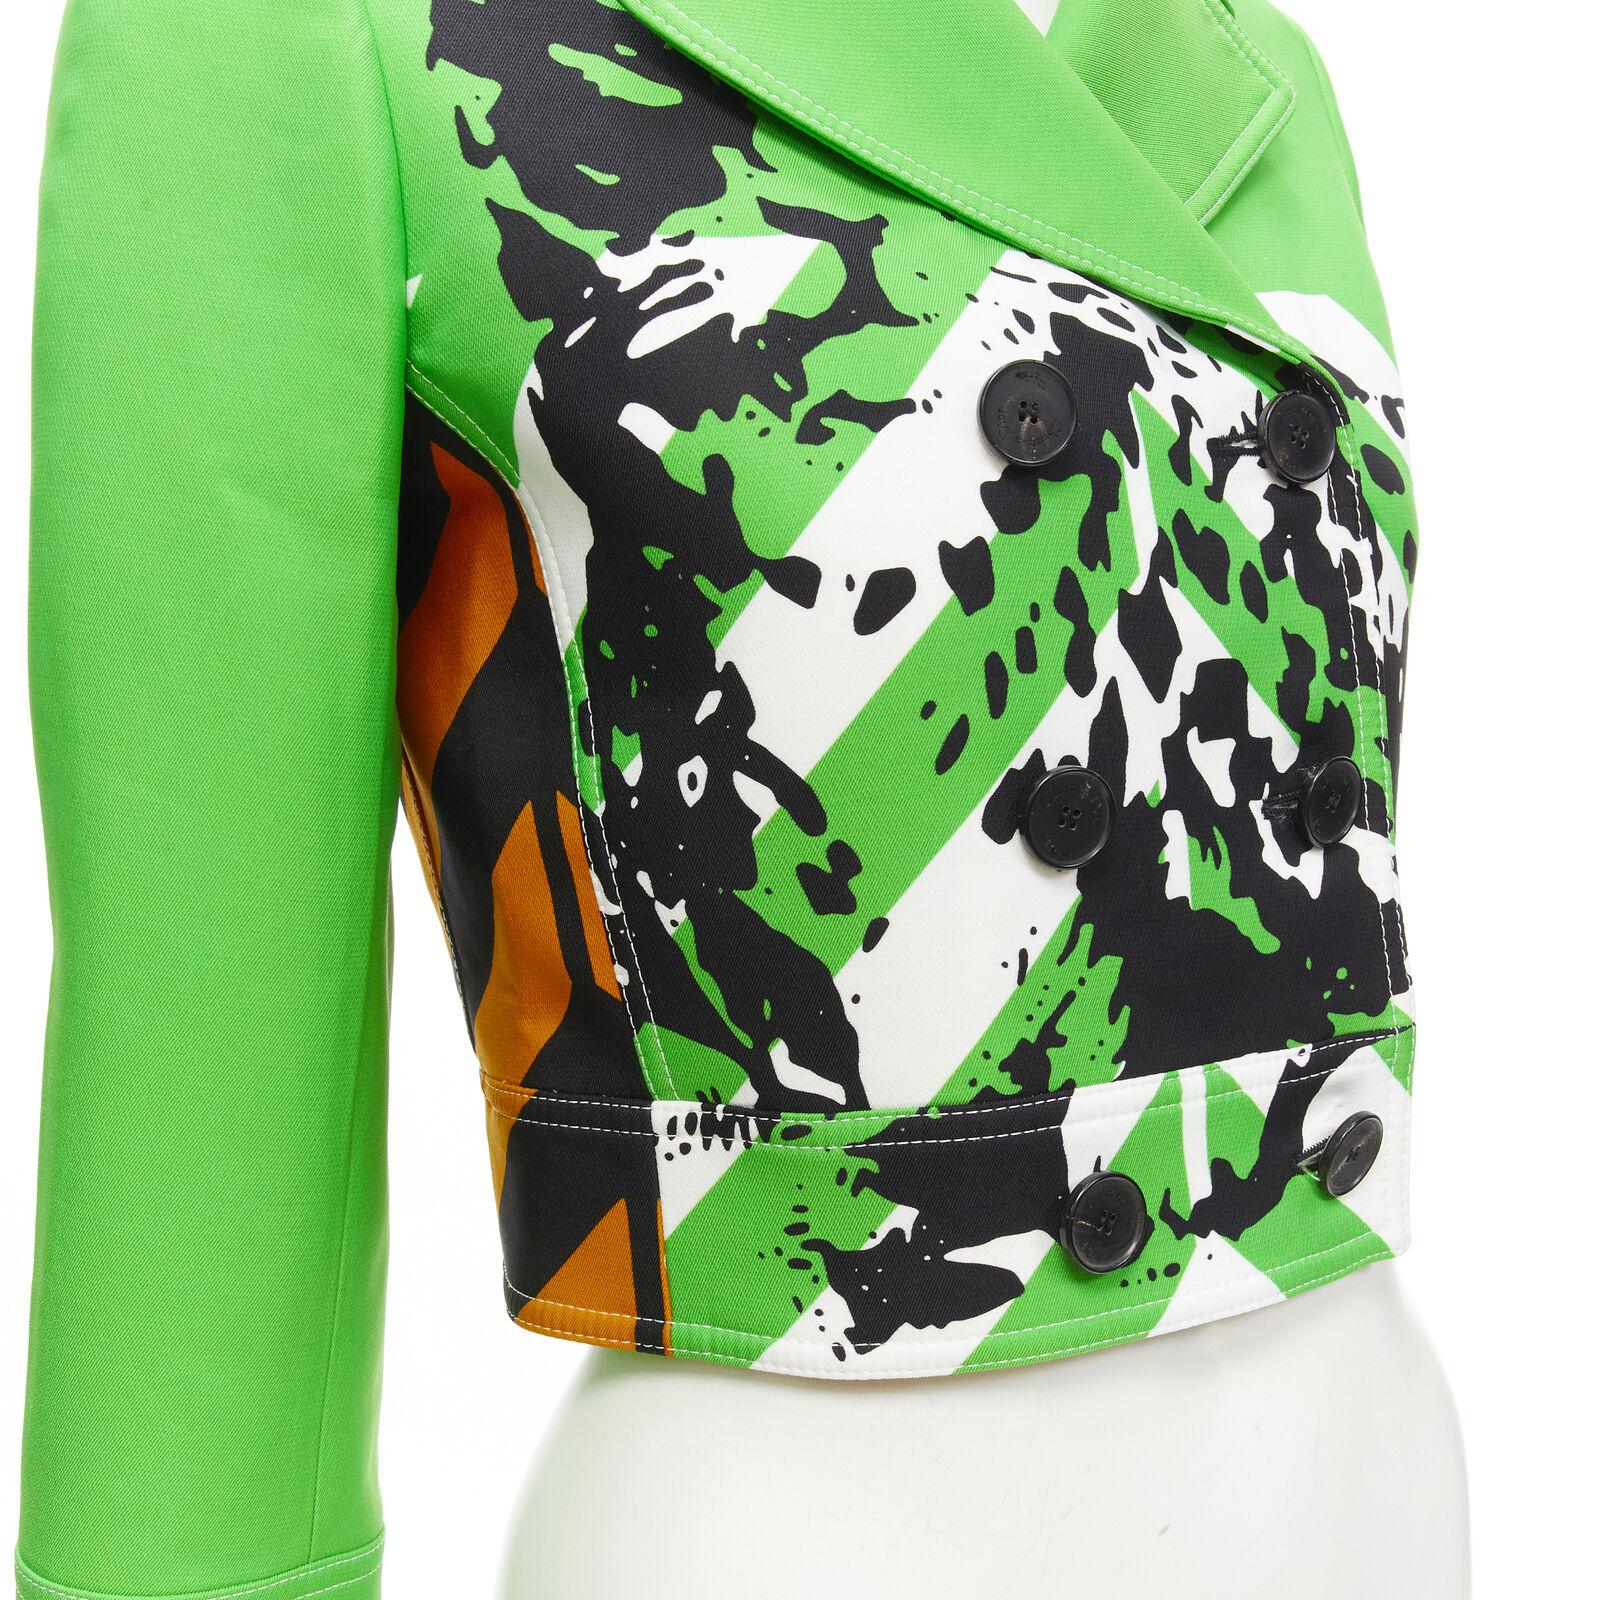 new CHRISTIAN DIOR 2022 Runway green Fantaisie animalier cropped jacket FR34 XS
Reference: AAWC/A00348
Brand: Christian Dior
Designer: Maria Grazia Chiuri
Collection: Spring Summer 2022 - Runway
Material: Polyester, Silk
Color: Green
Pattern: